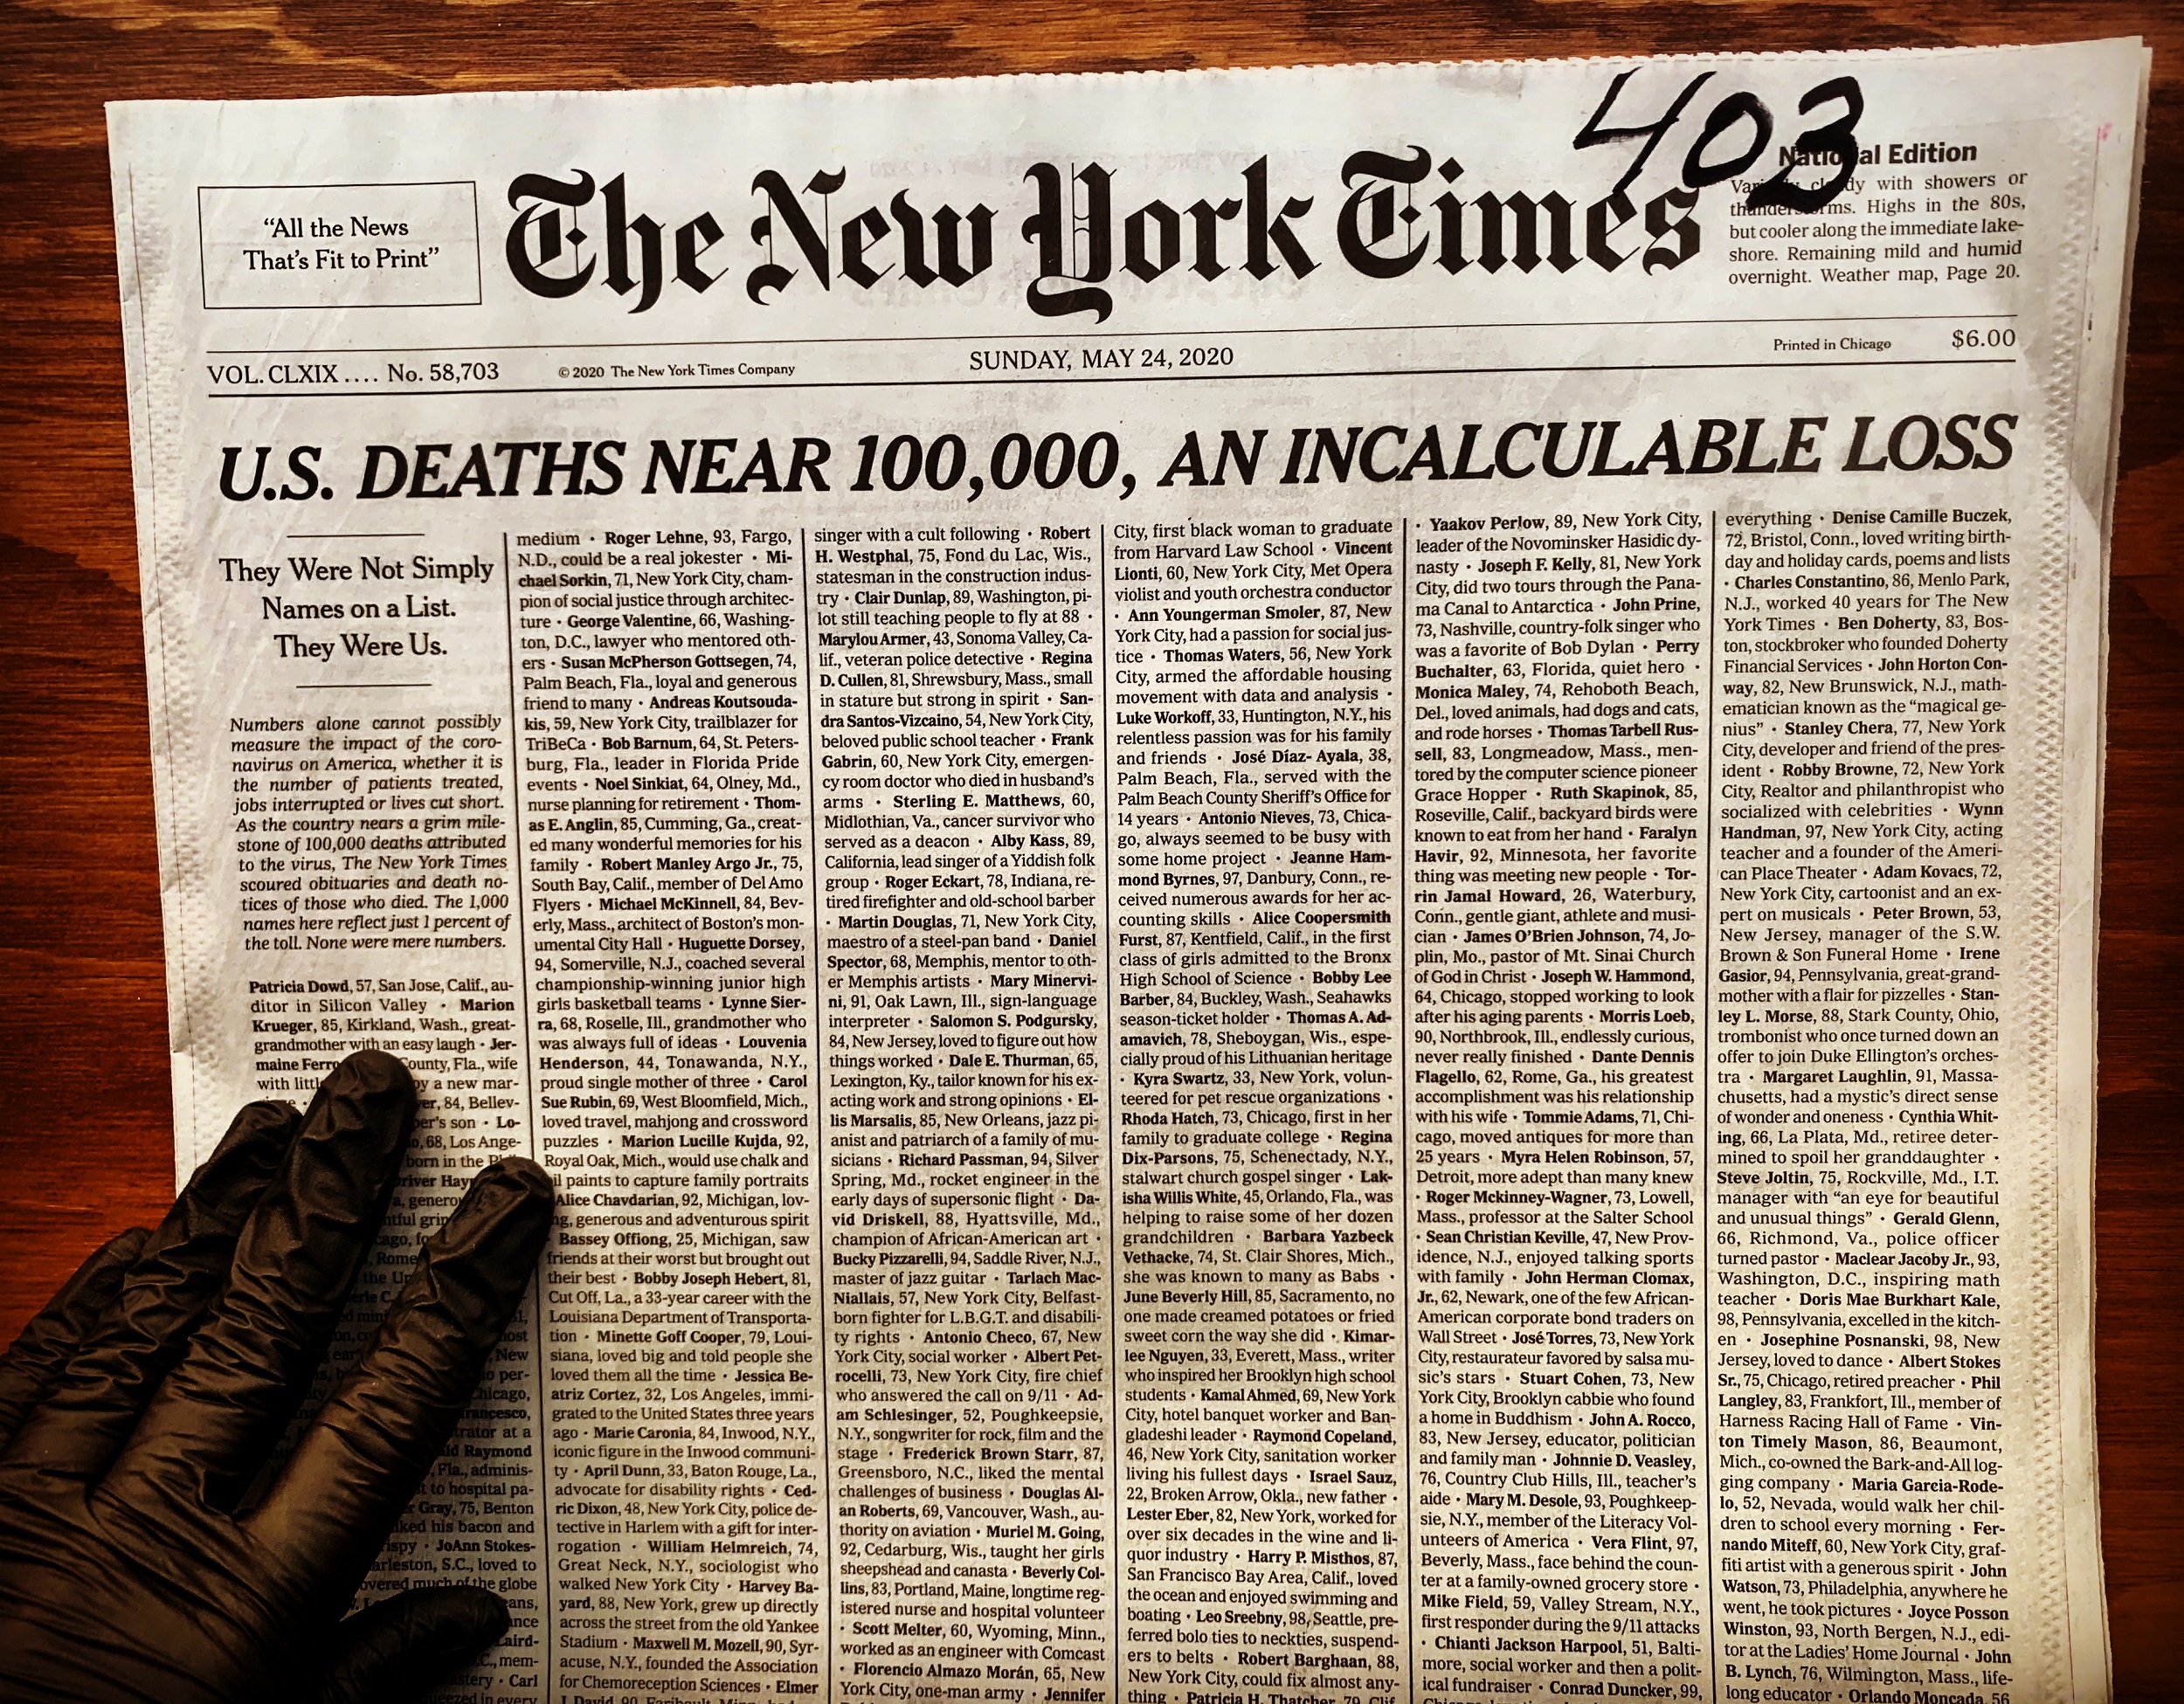 Color photograph of the front page of the New York Times with the headline "U.S. Deaths Near 100,000, an Incalculable Loss." A gloved hand appears in the lower left corner of the image, near the fold of the newspaper.